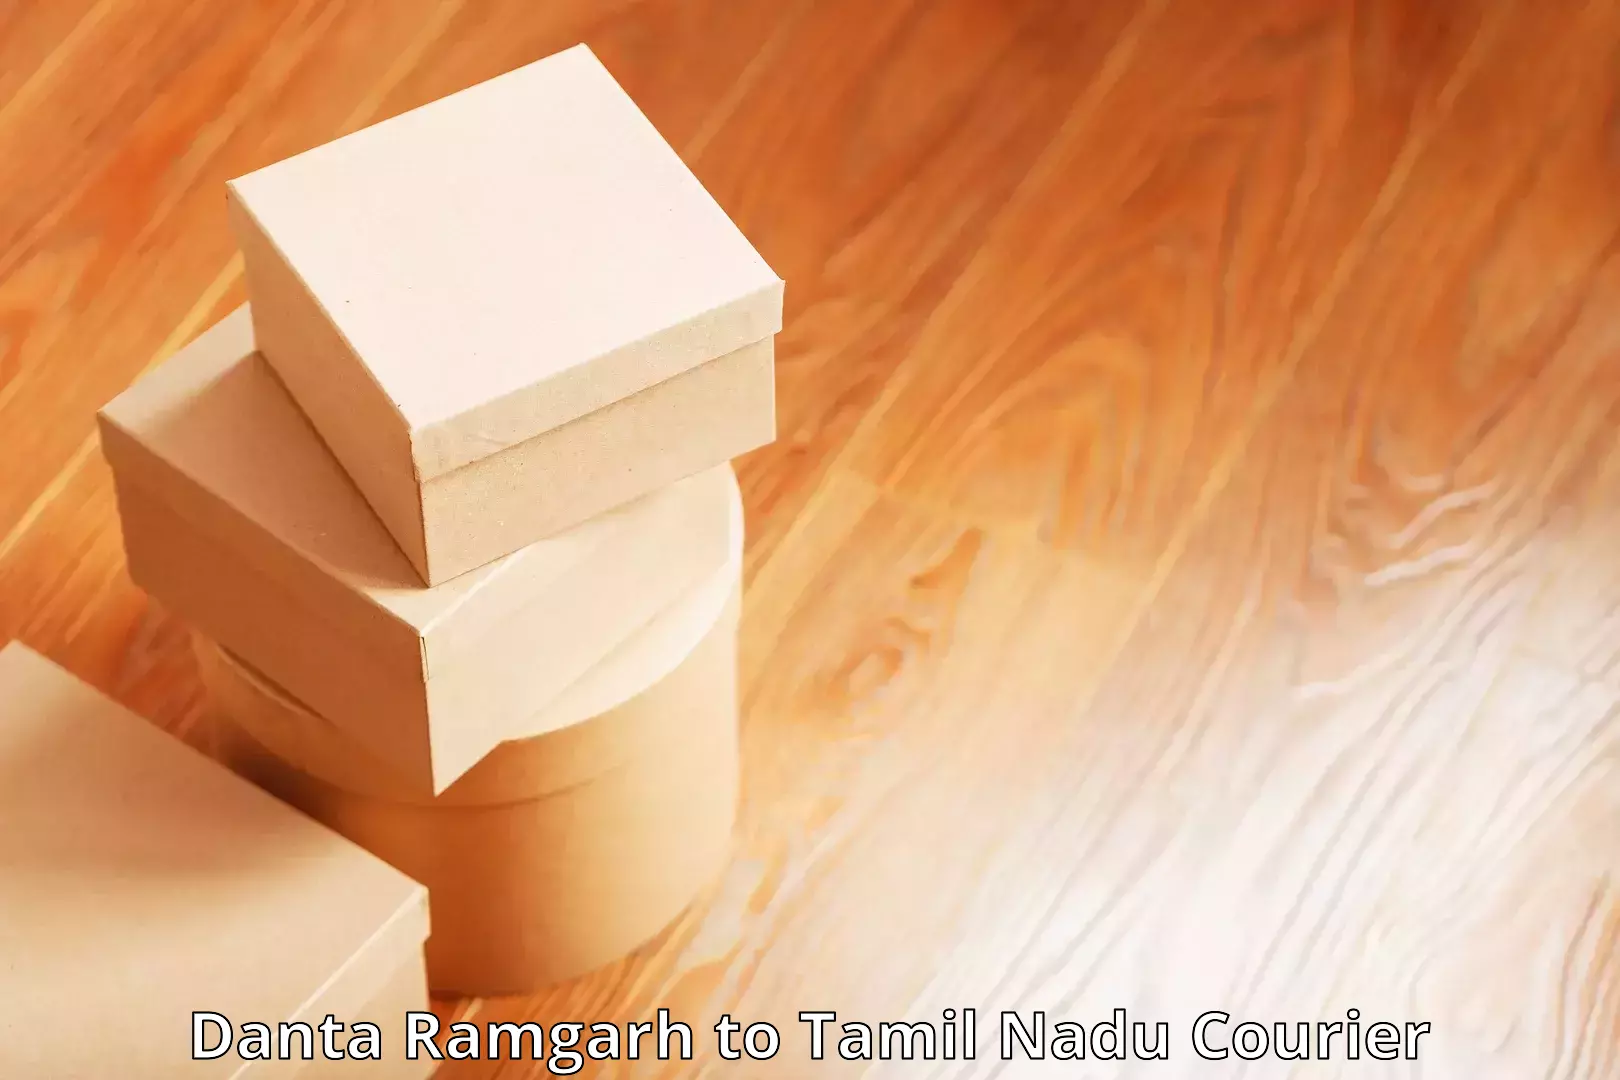 Customer-oriented courier services Danta Ramgarh to Chennai Port